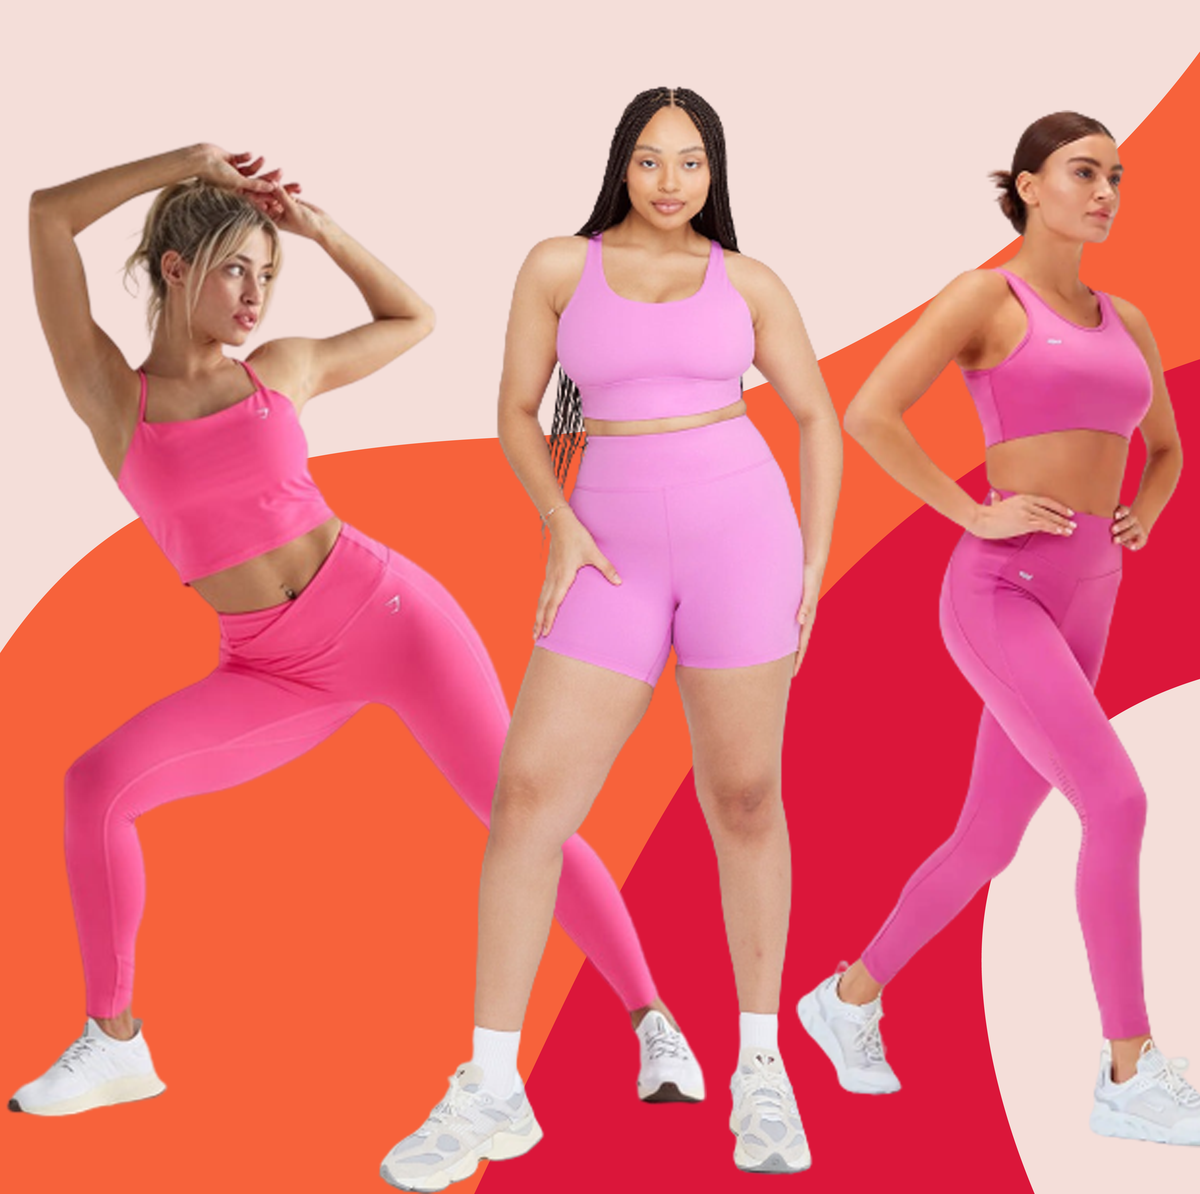 nike workout gear  Athleisure outfits, Athletic outfits, Outfits